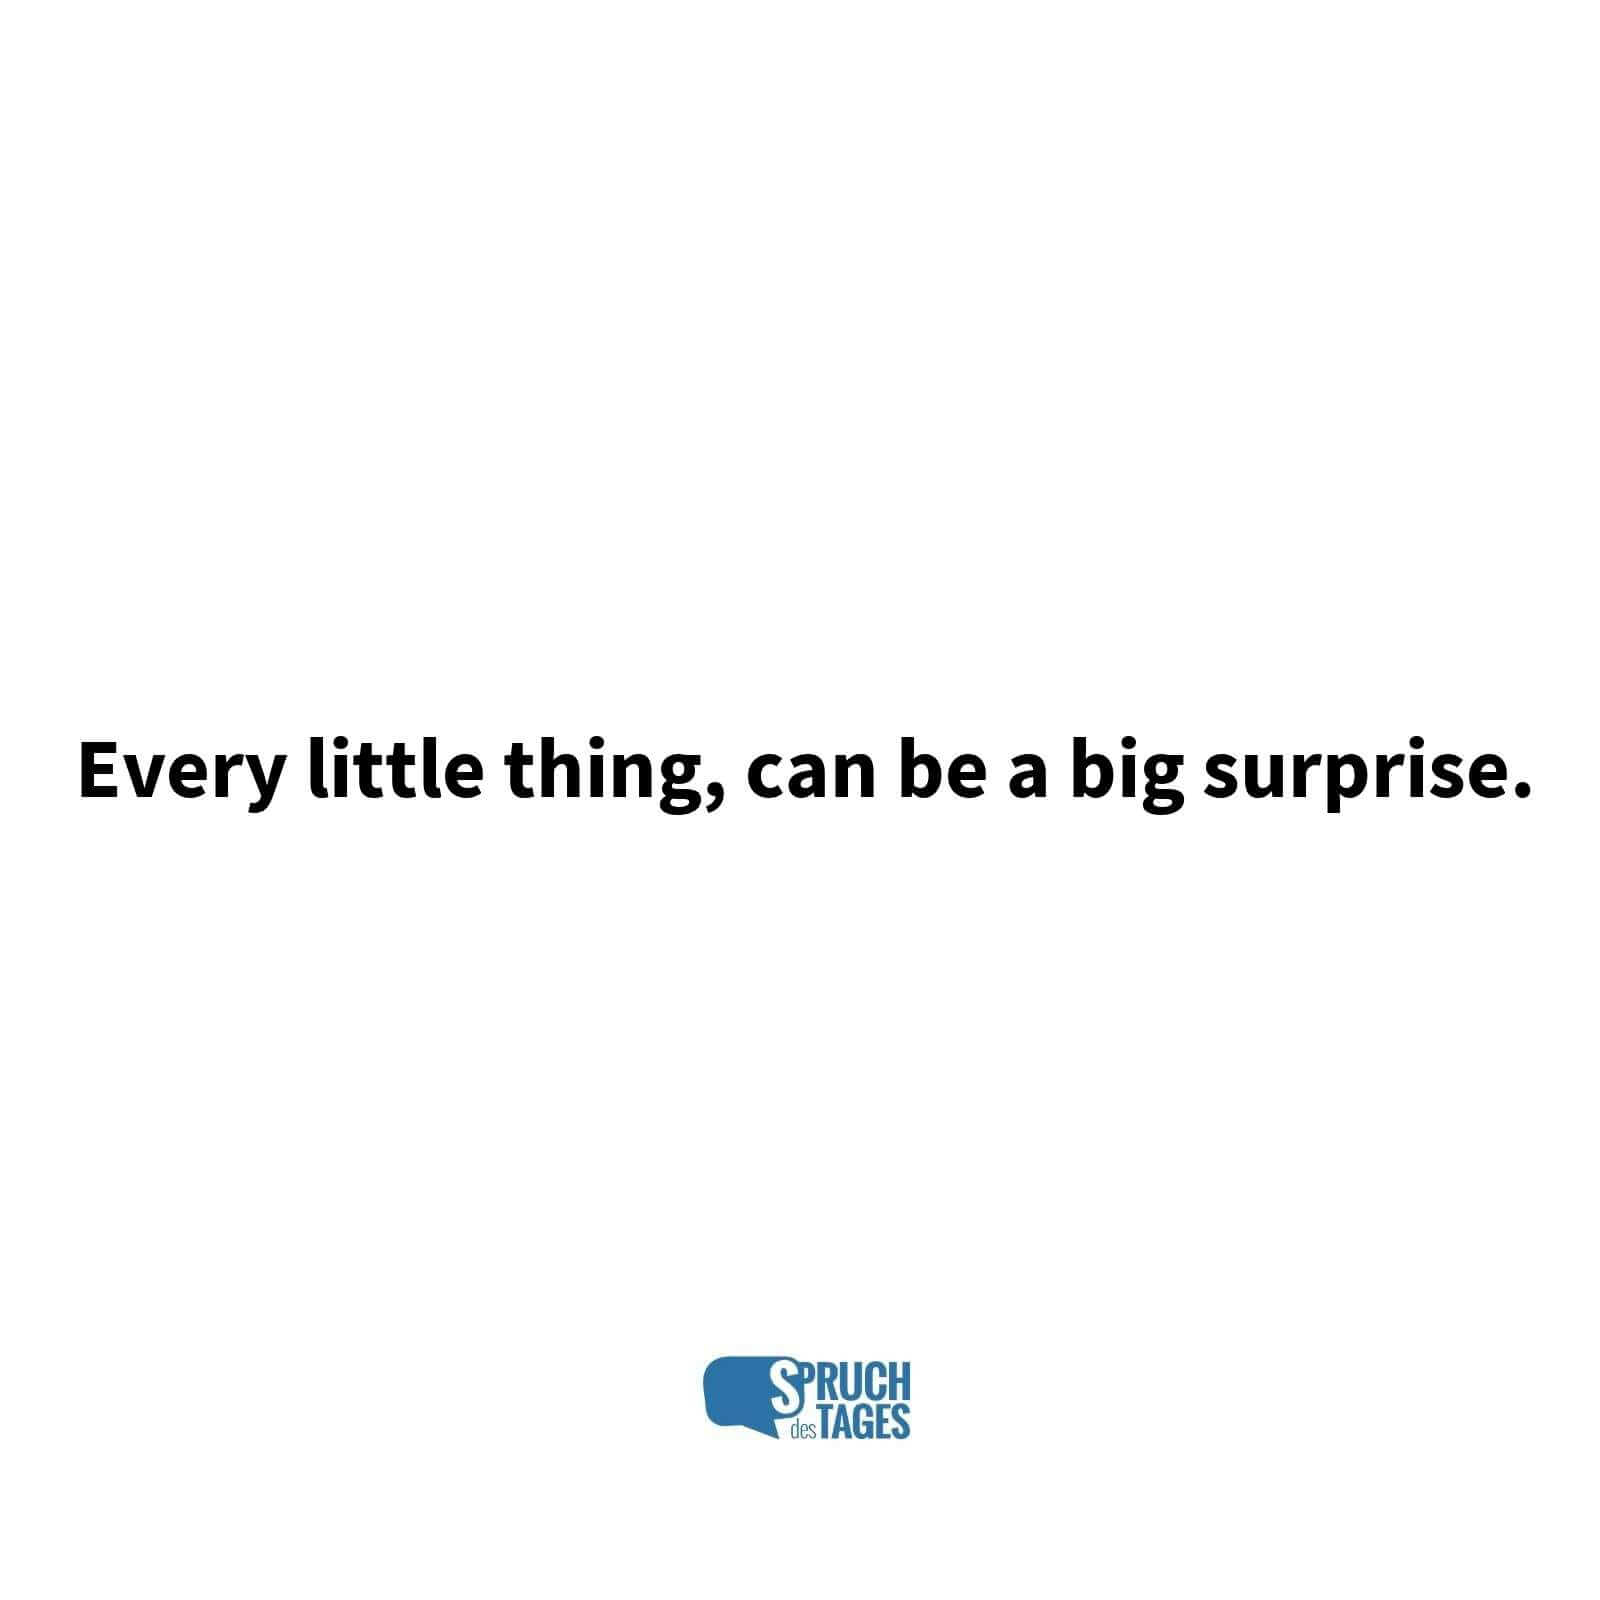 Every little thing, can be a big surprise.